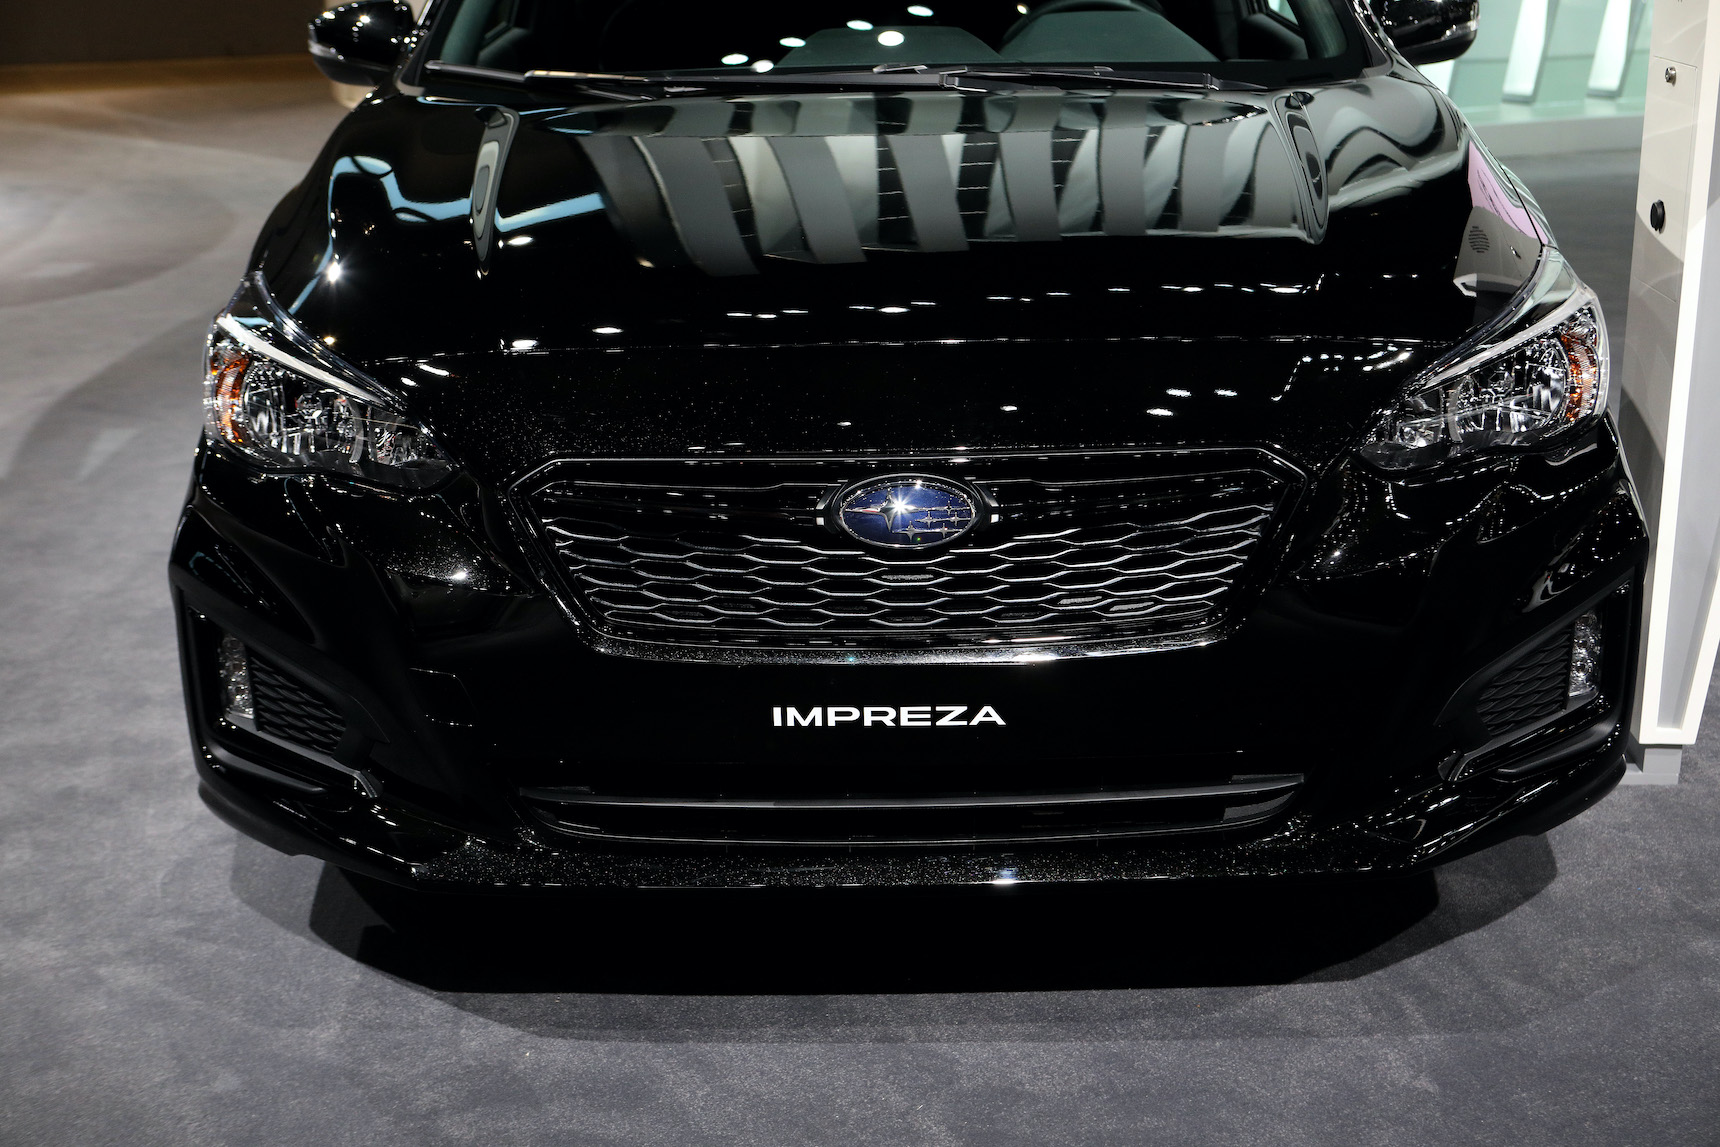 The 2019 Subaru Impreza is on display at the 111th Annual Chicago Auto Show